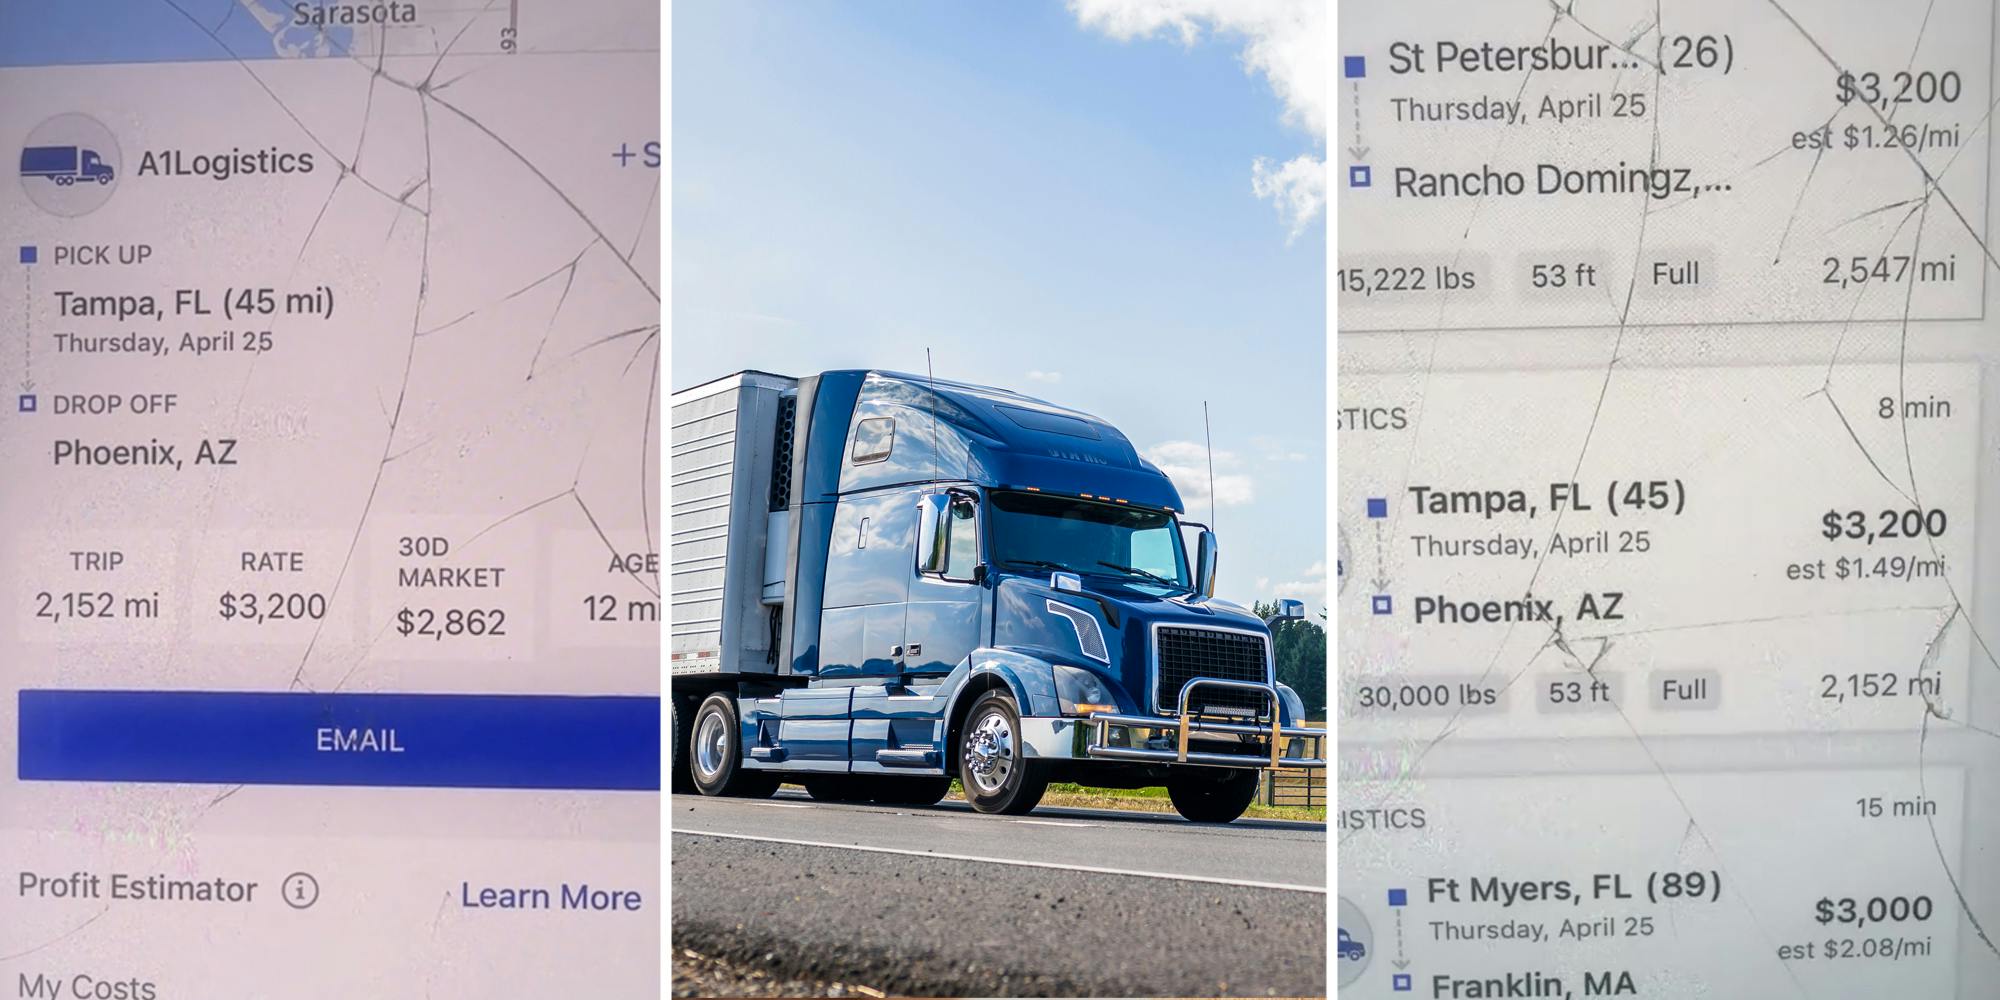 ‘I’m not even a driver and that price is outrageous’: Truck driver asked to go over 2K miles for a job. He can’t believe how much it pays